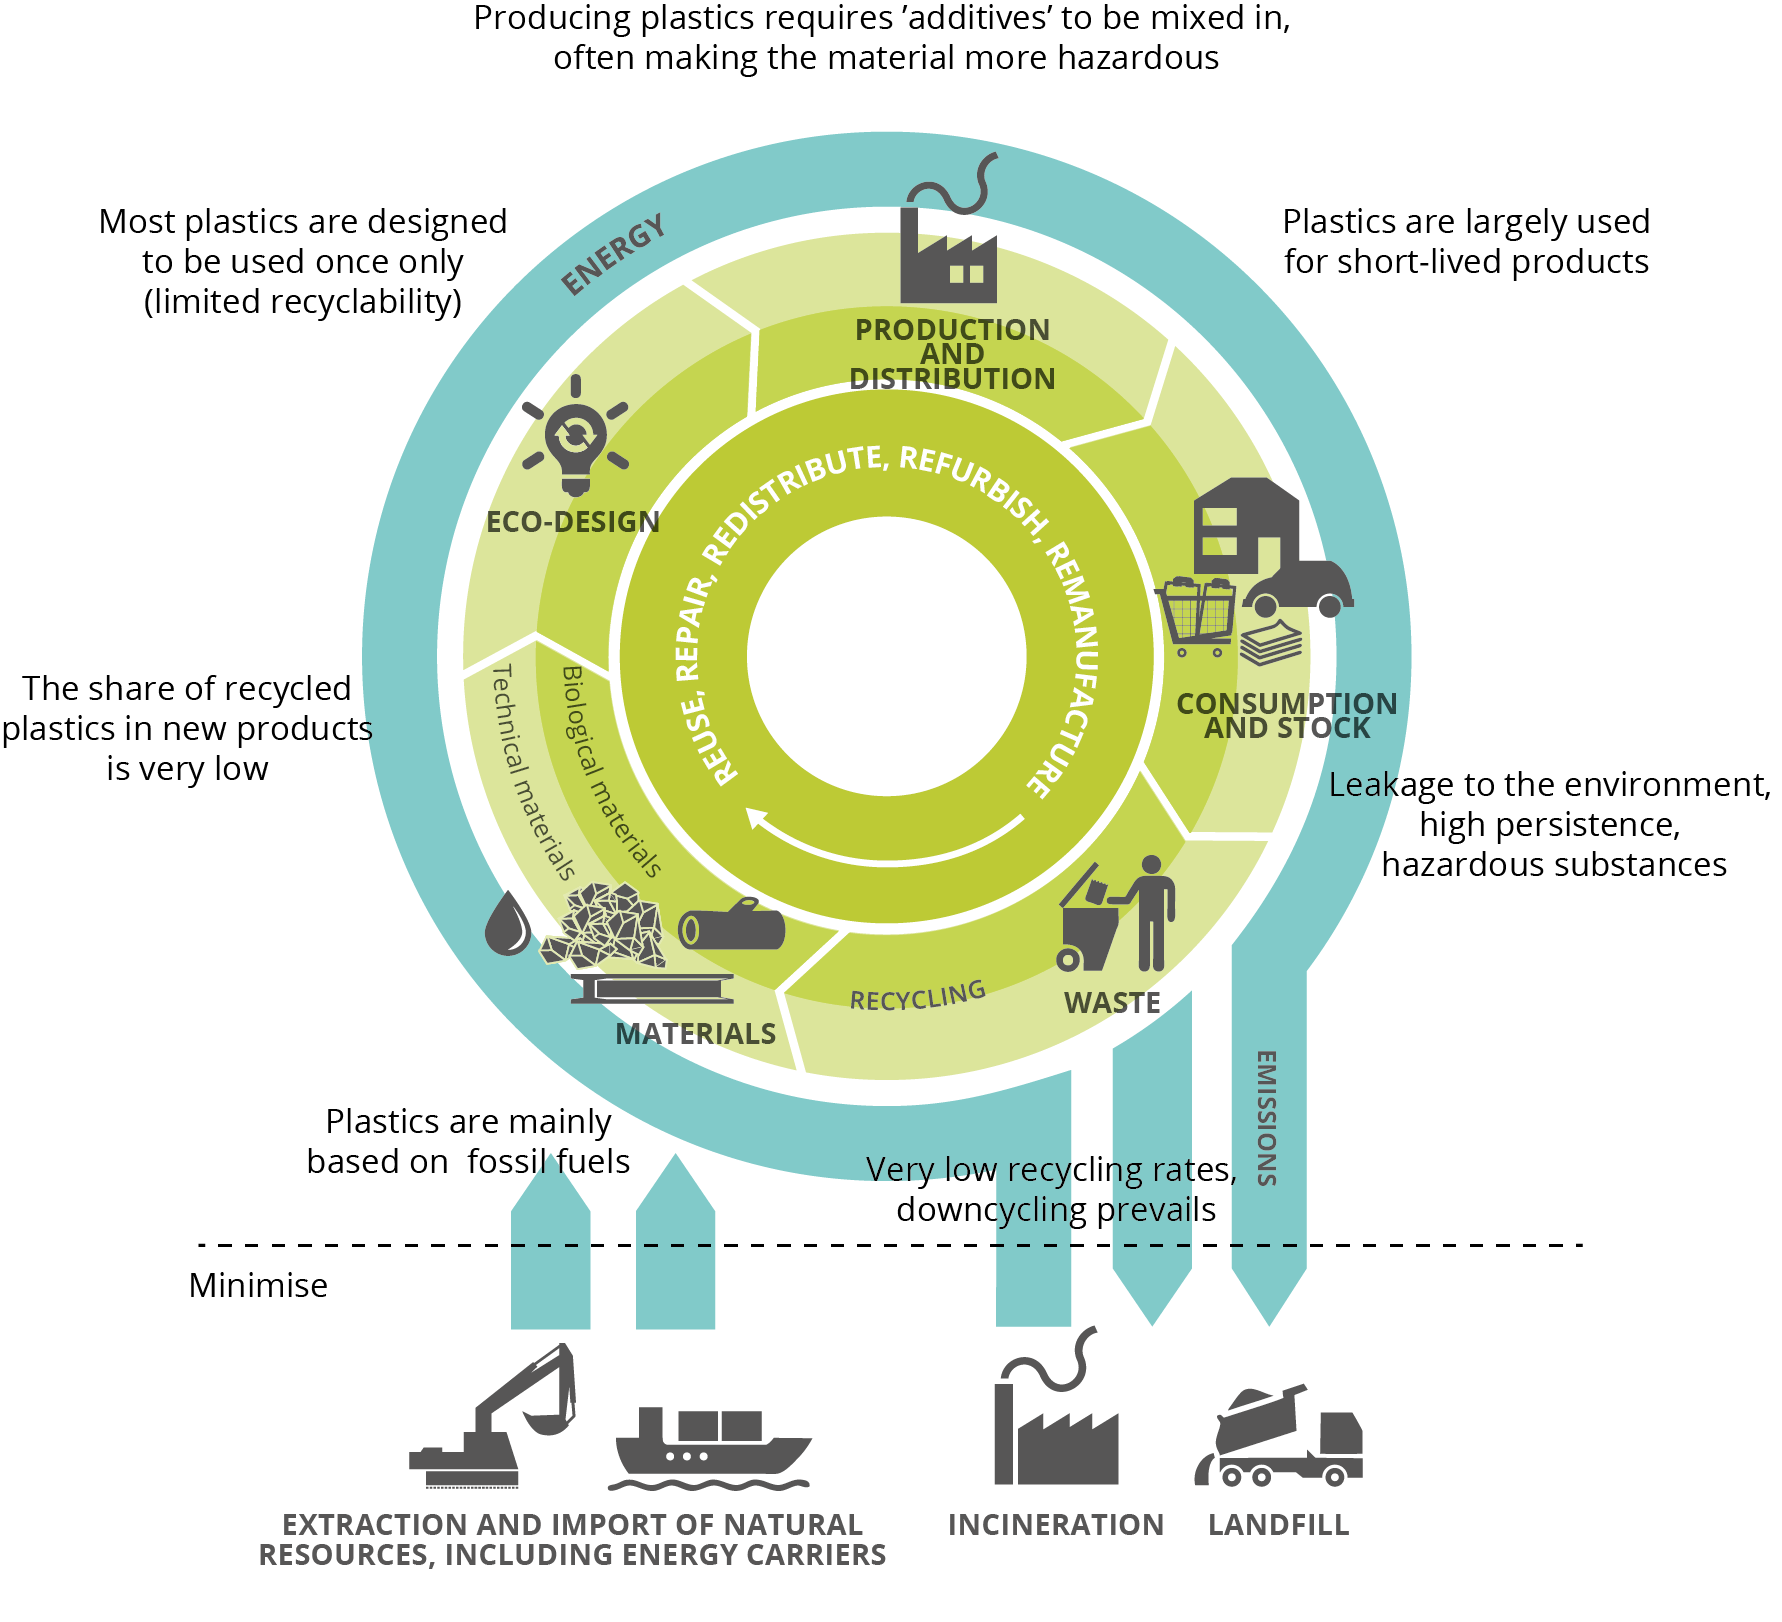 Challenges in shifting from a linear towards a circular plastics system